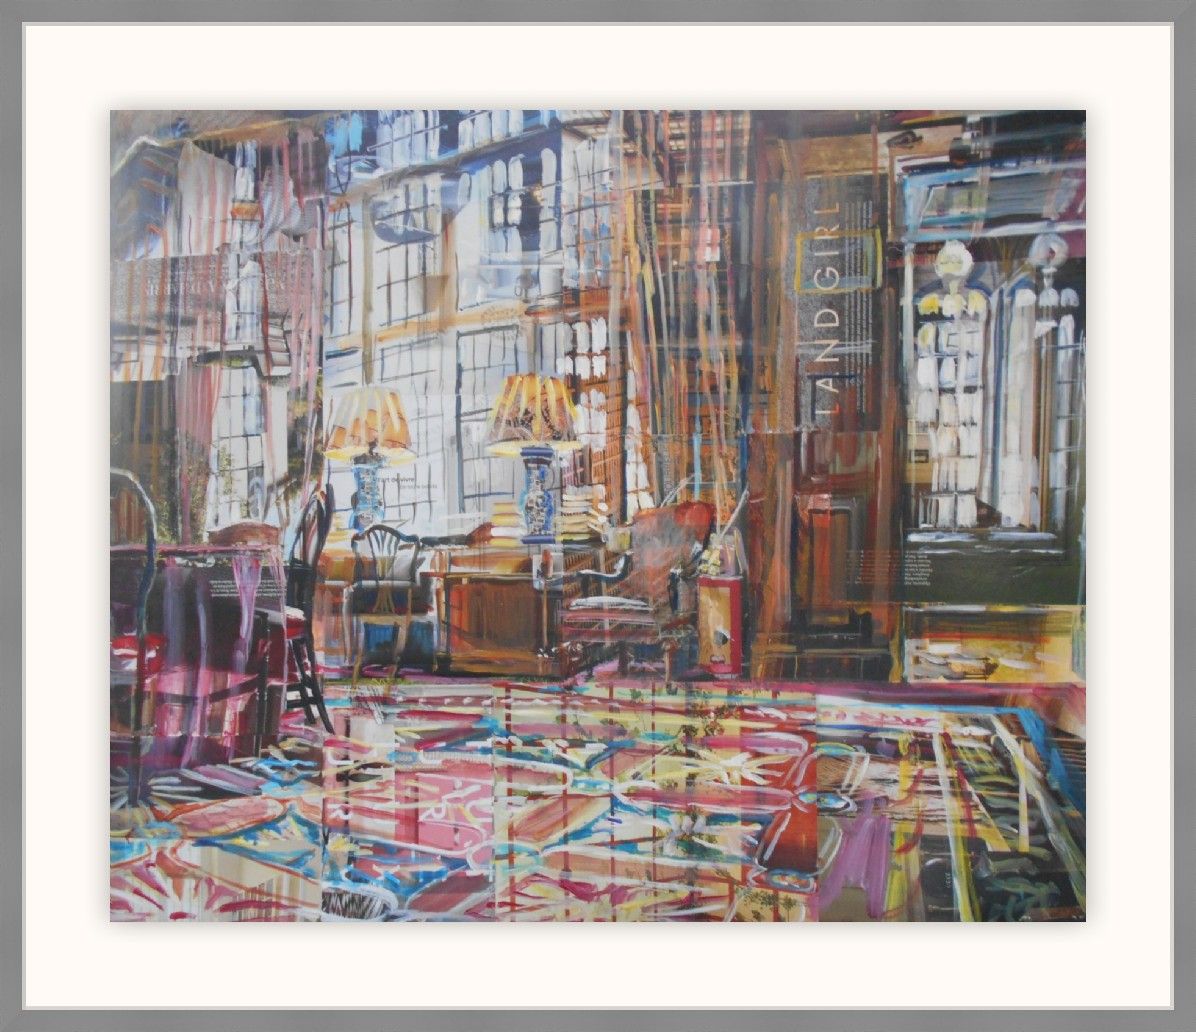 Merchant Taylor’s Hall, Library (landgirl) by Alison Pullen